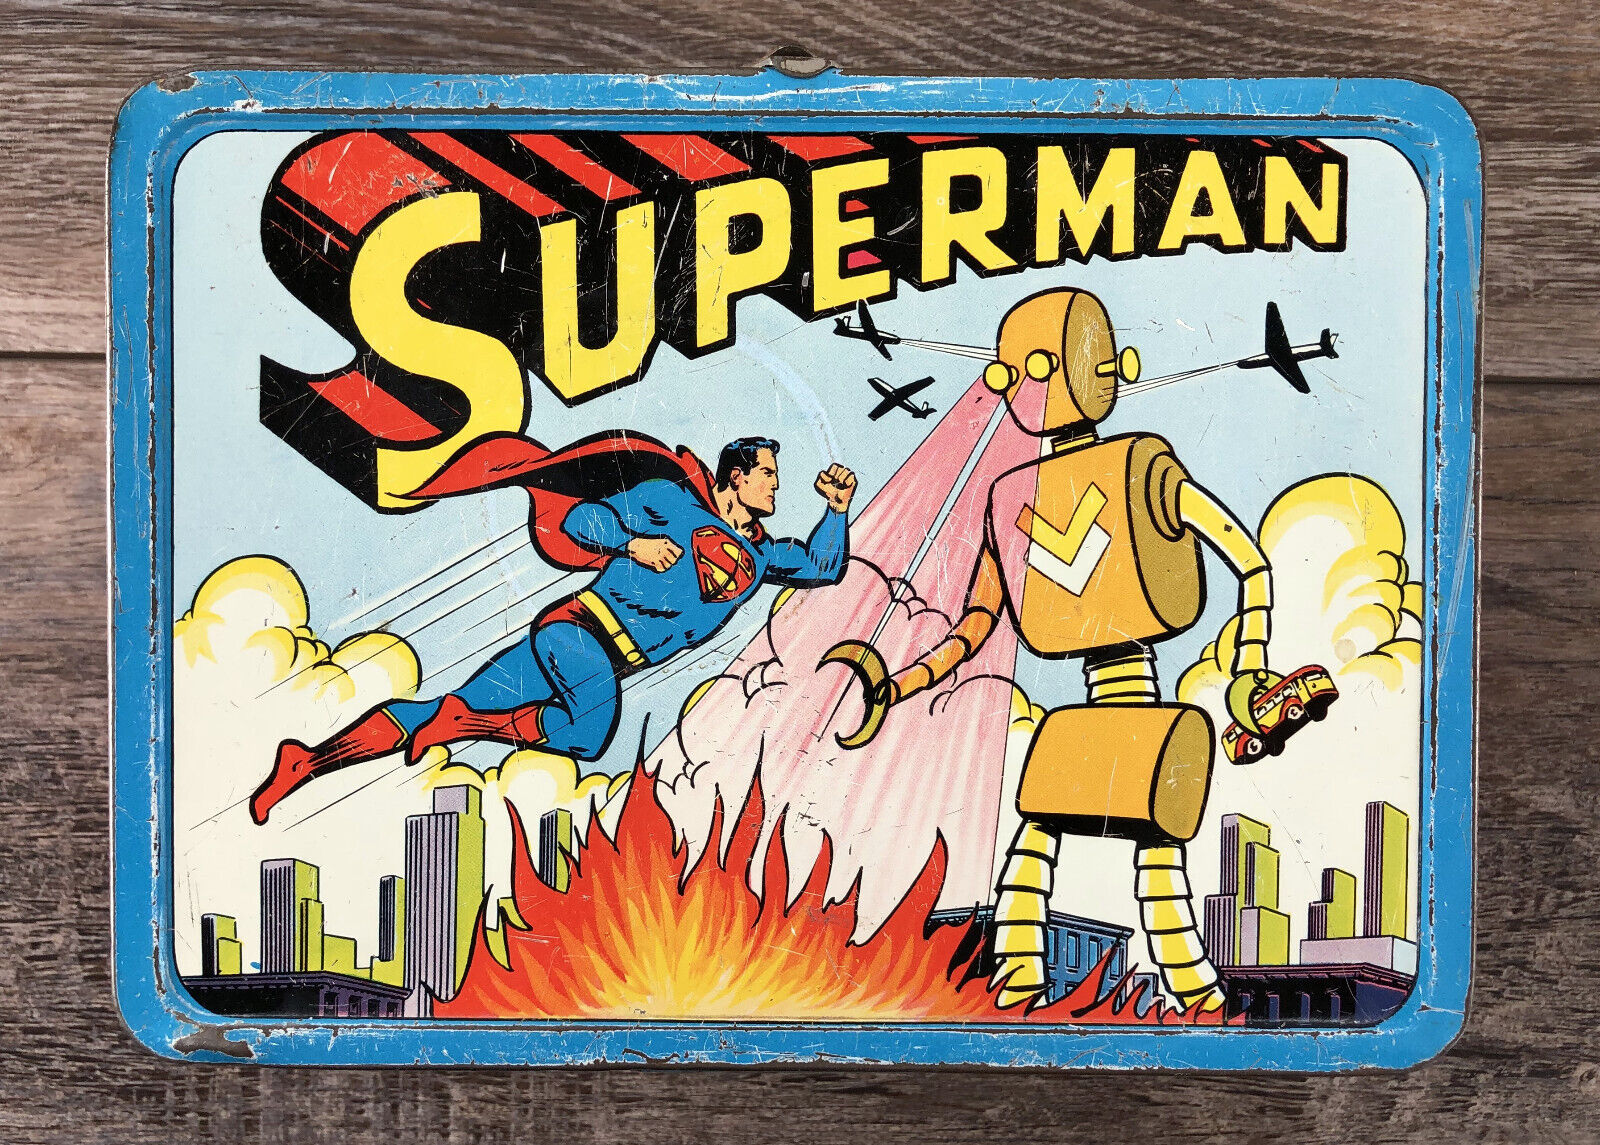 Superman vs. The Robot Metal Lunch Box - NO THERMOS - Vintage 1954 ADCO Airplane